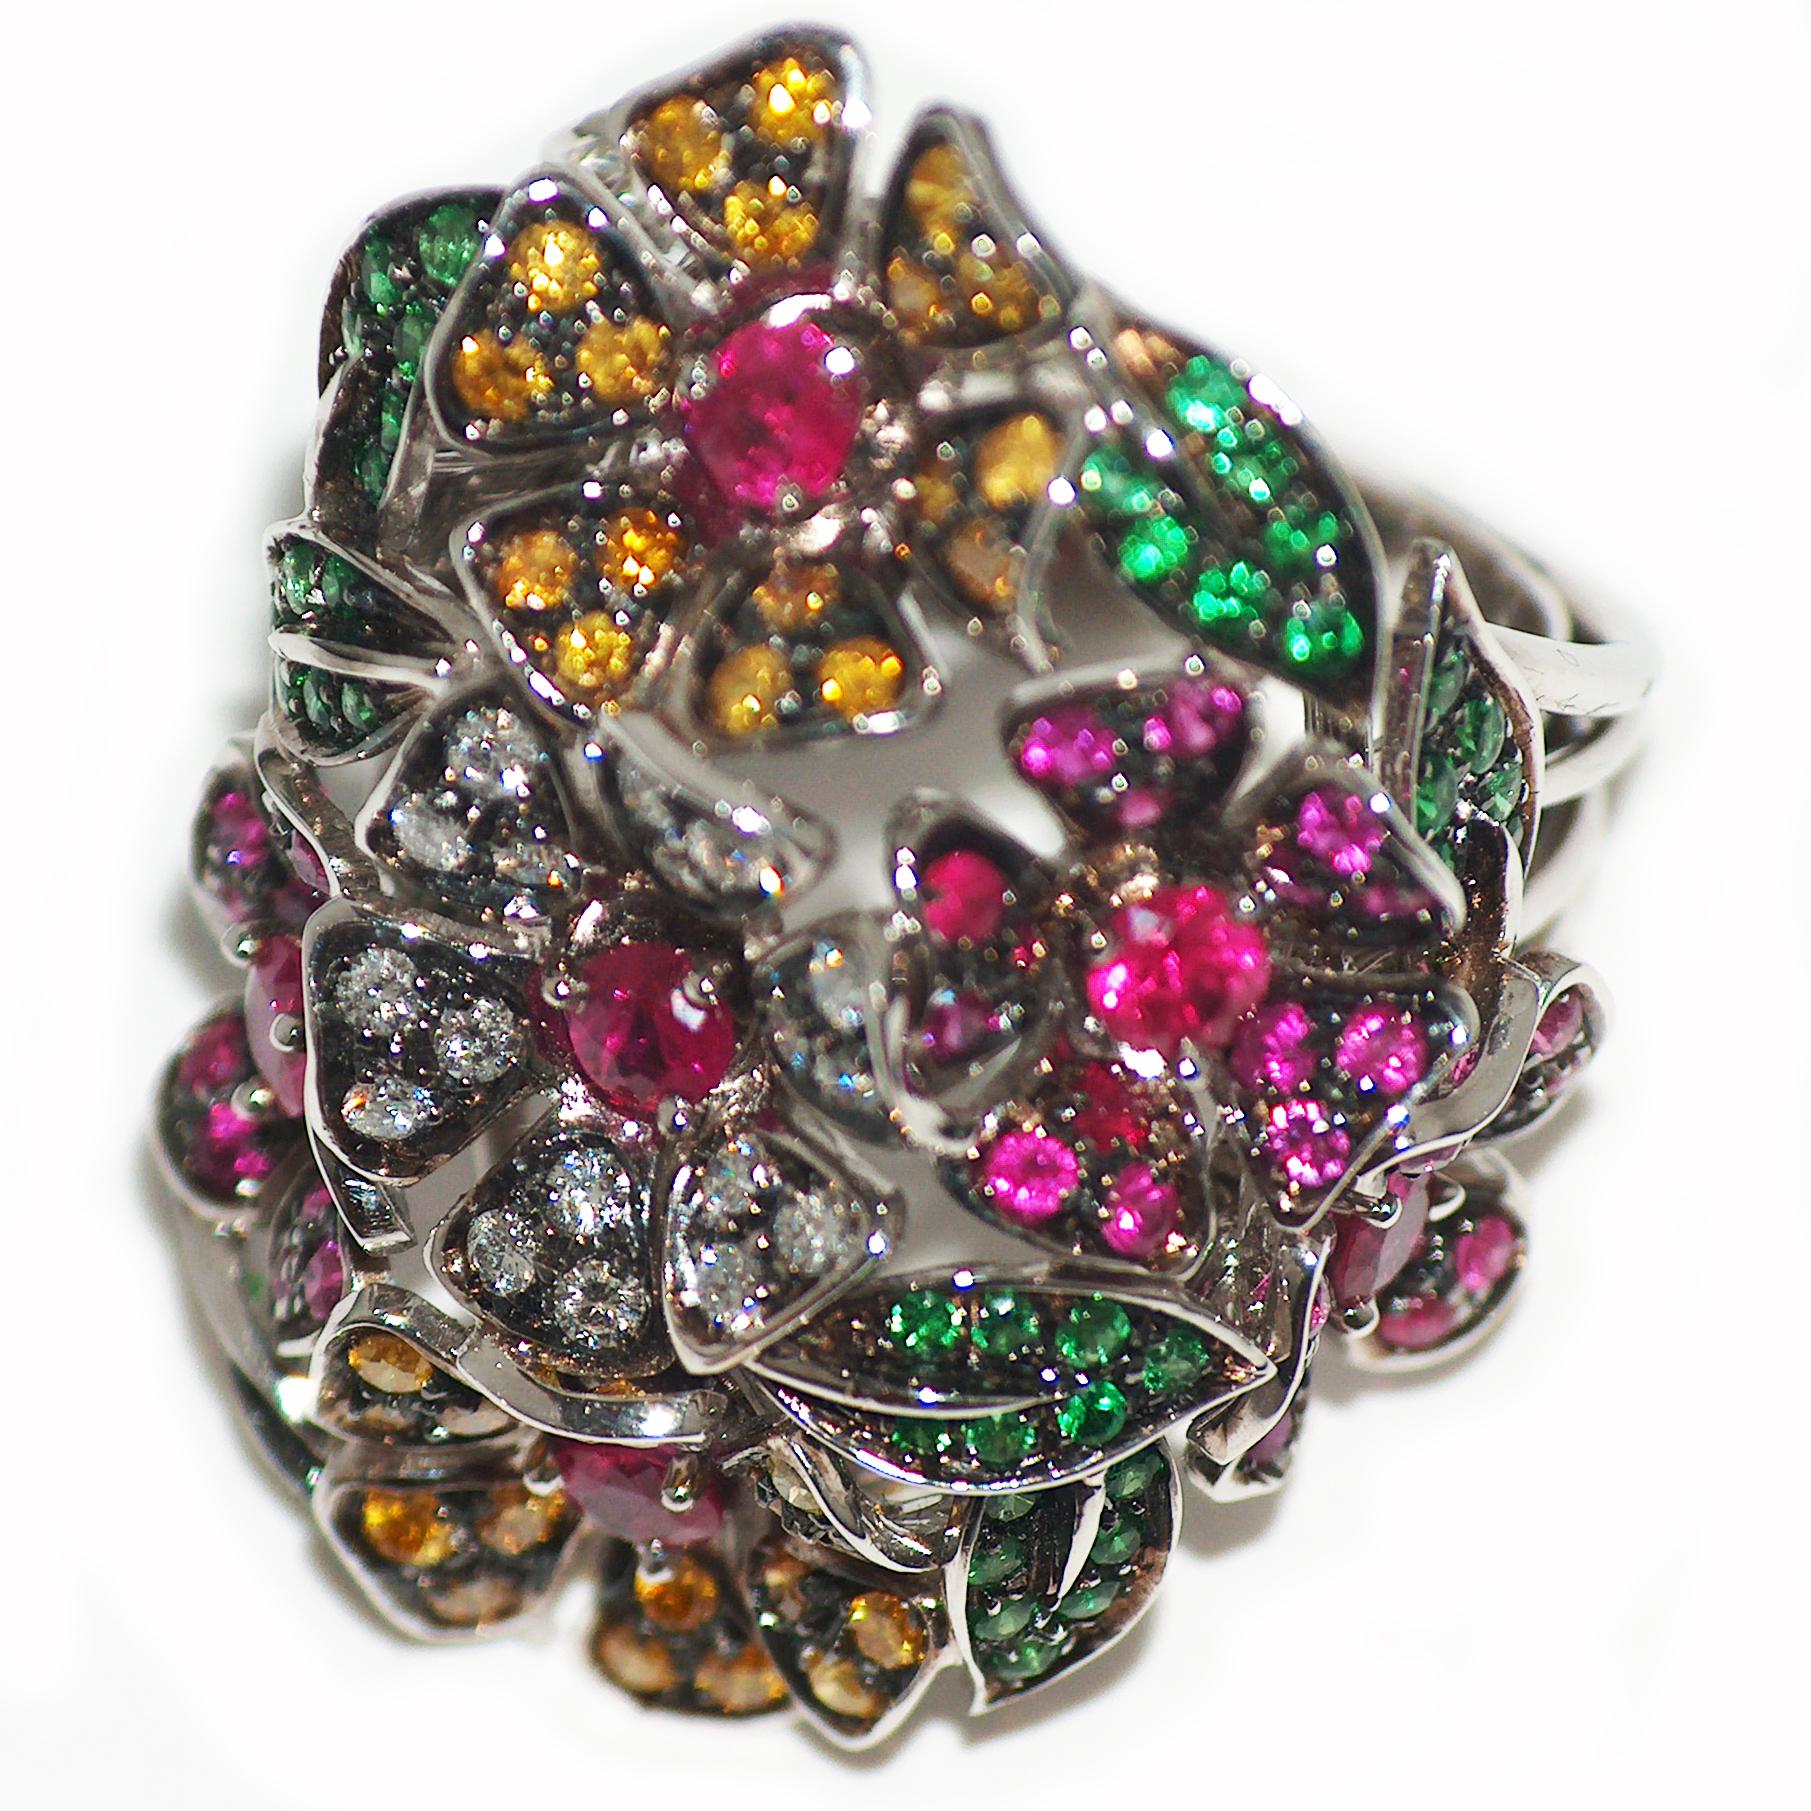 Paolo Piovan Diamonds, Sapphires, Rubies, Tsavorites 18 Karat White Gold Ring In New Condition For Sale In Padova, Padova